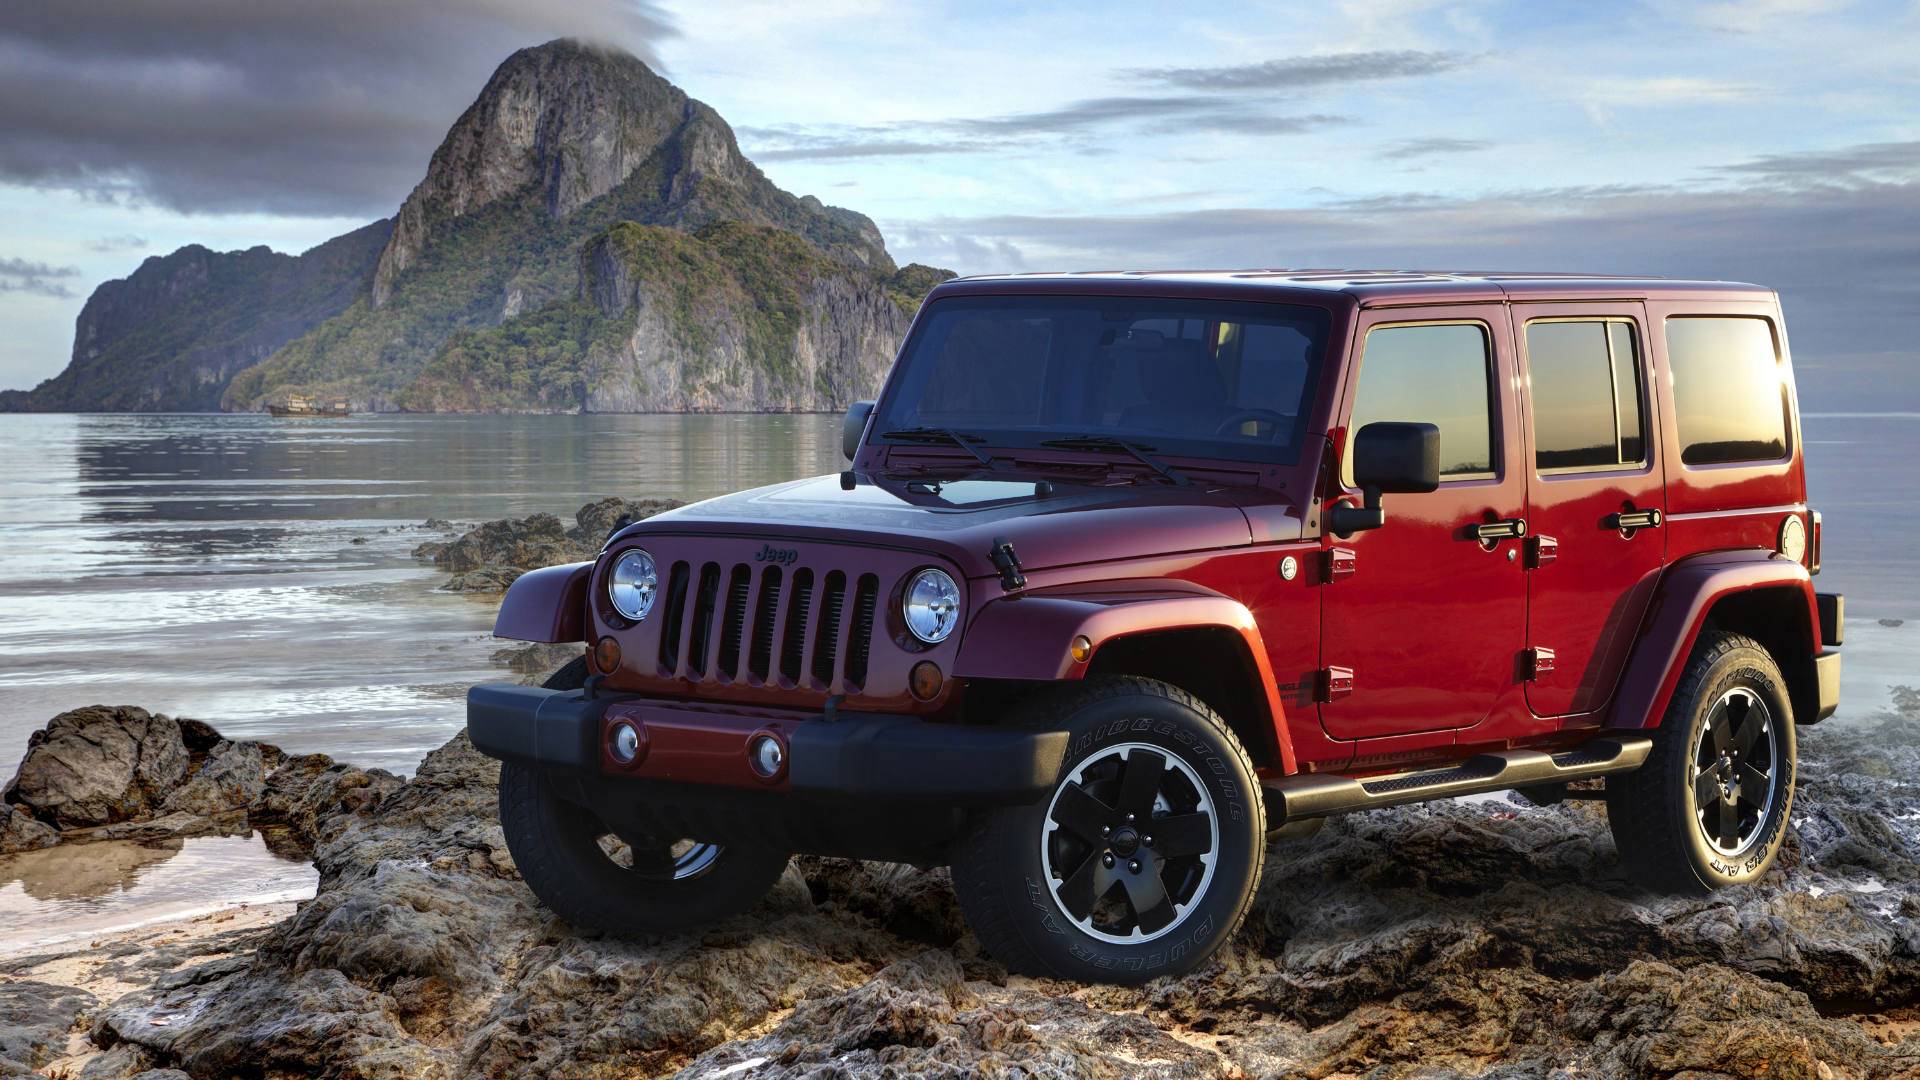 2012 Red Jeep Wrangler HD Wallpapers